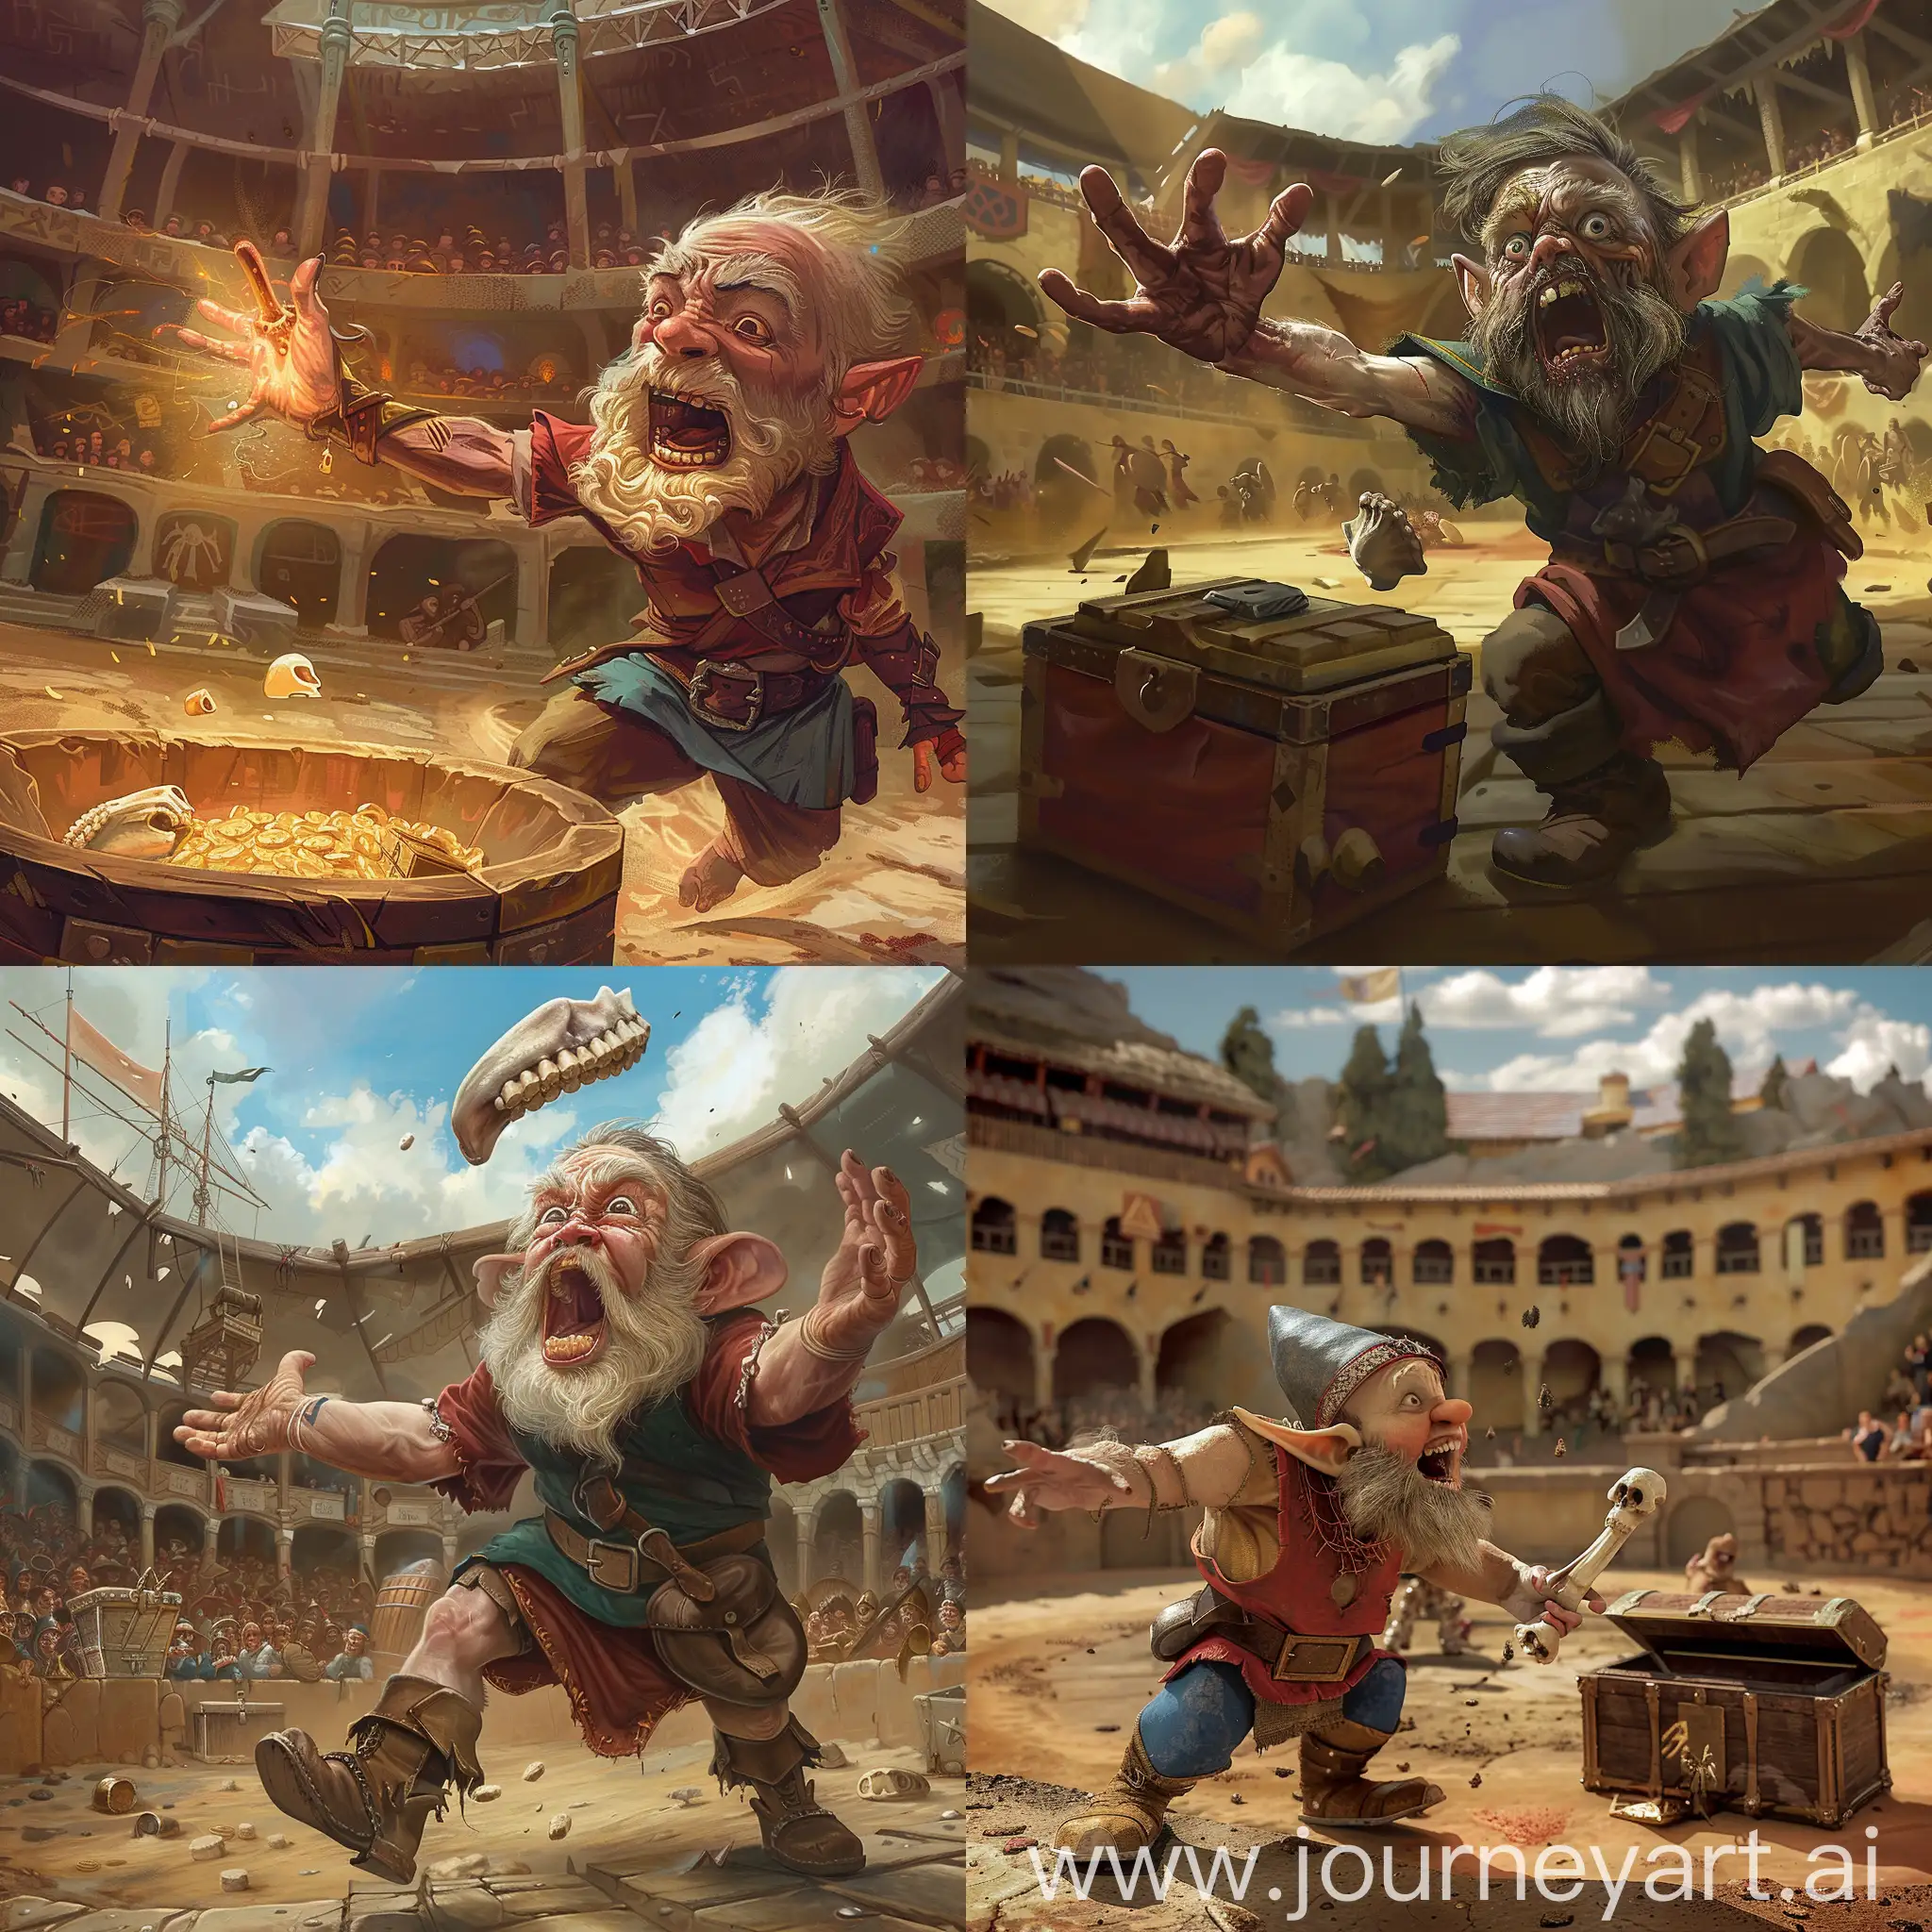 Photo of A dwarf in an open arena that is holding a human jaw bone in his hand, he is reaching out with the jaw bone and about to touch a treasure chest with the jaw bone. The dwarf is very scared and confused.